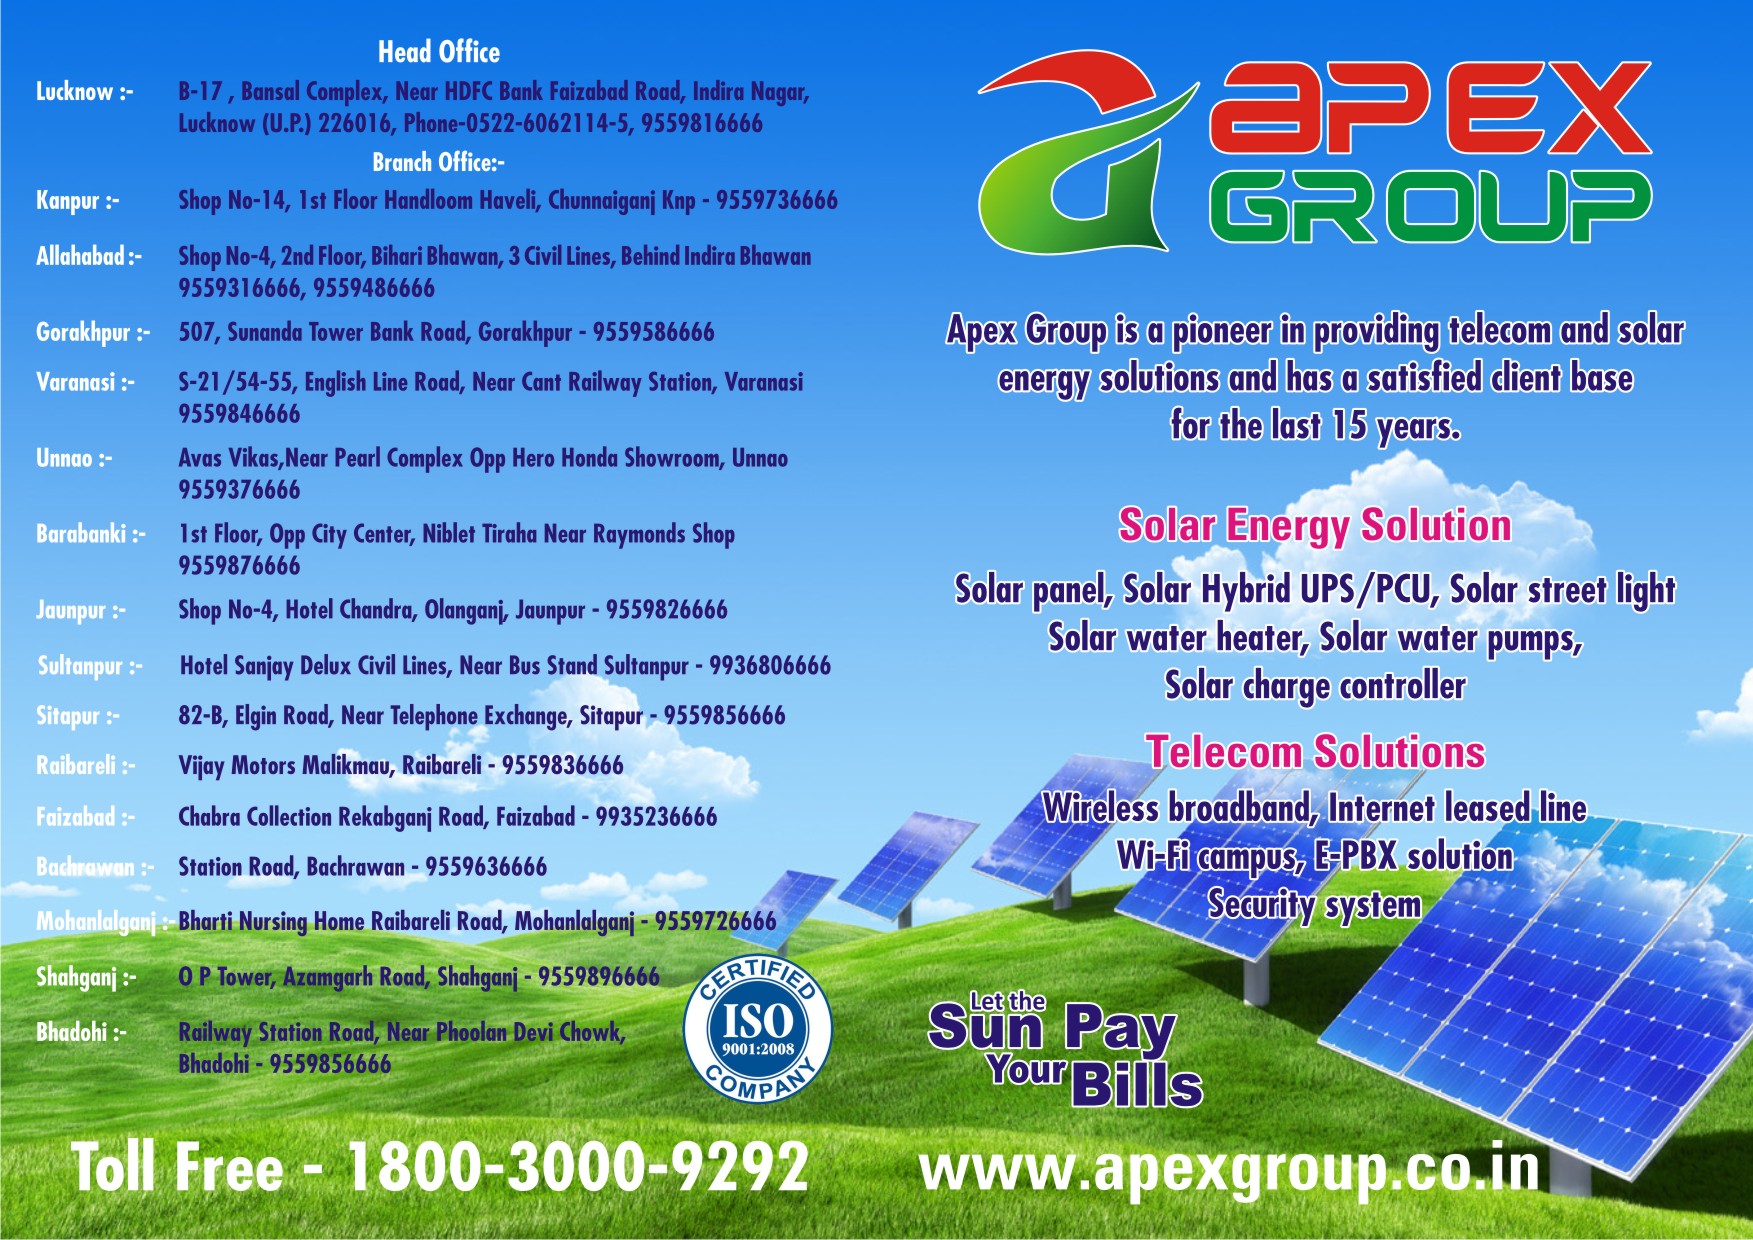 Apex Group Support and Locations